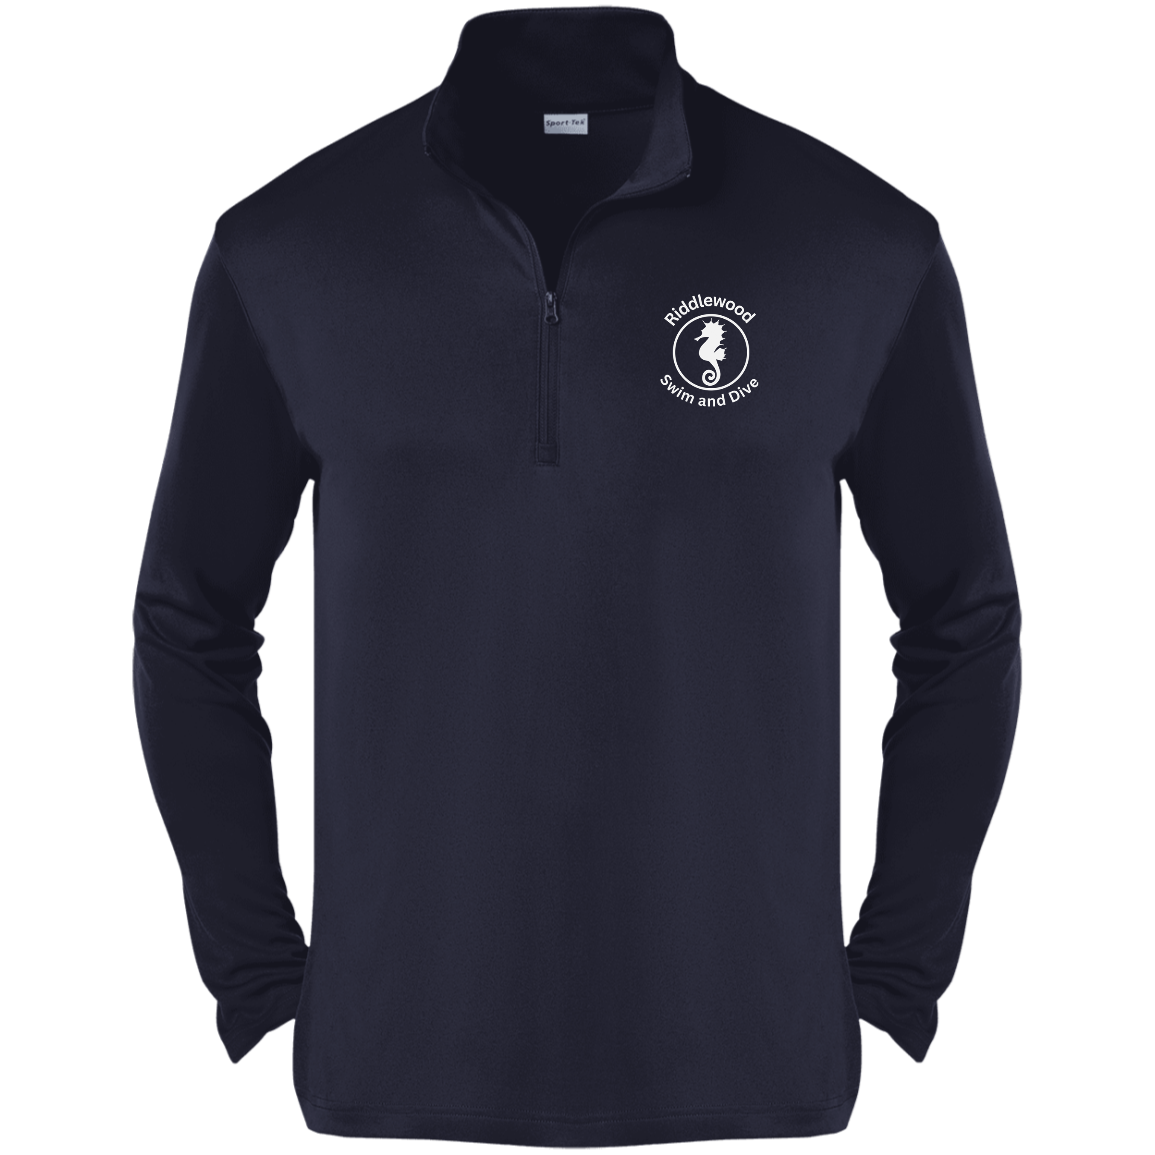 Riddlewood White TeamStore Competitor 1/4-Zip Pullover